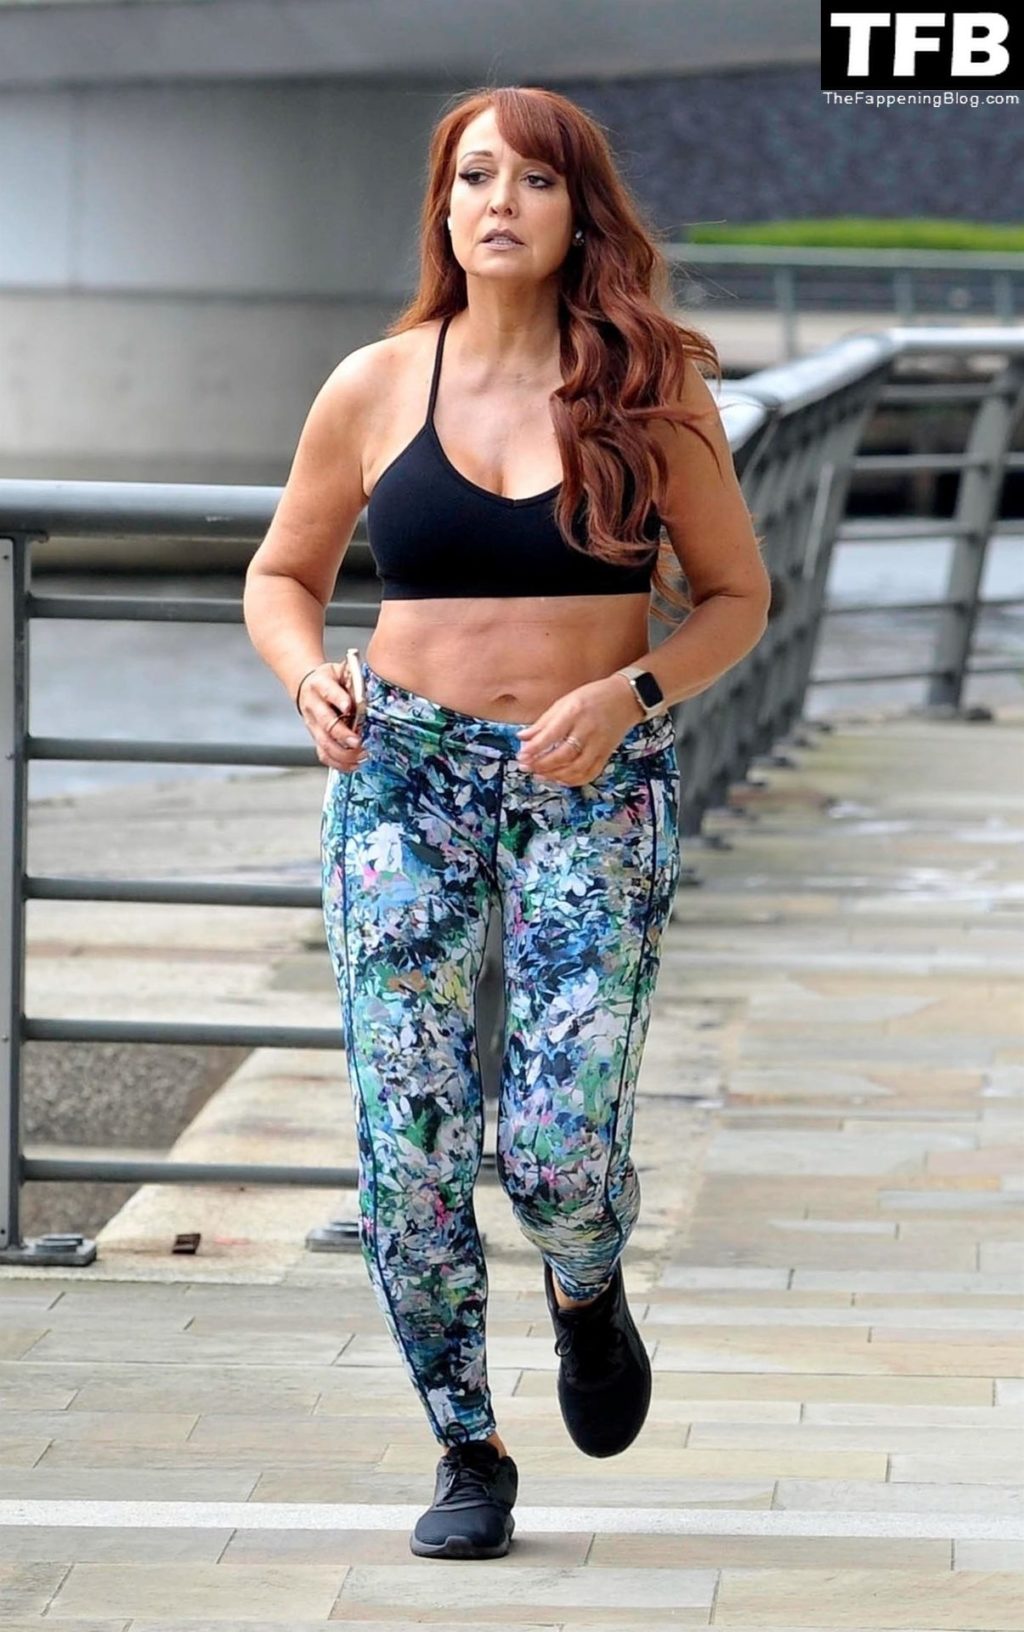 Amy Anzel Sexy The Fappening Blog 1 1024x1632 - Amy Anzel Puts on a Busty Display Working Out at Media City in Manchester (13 Photos)